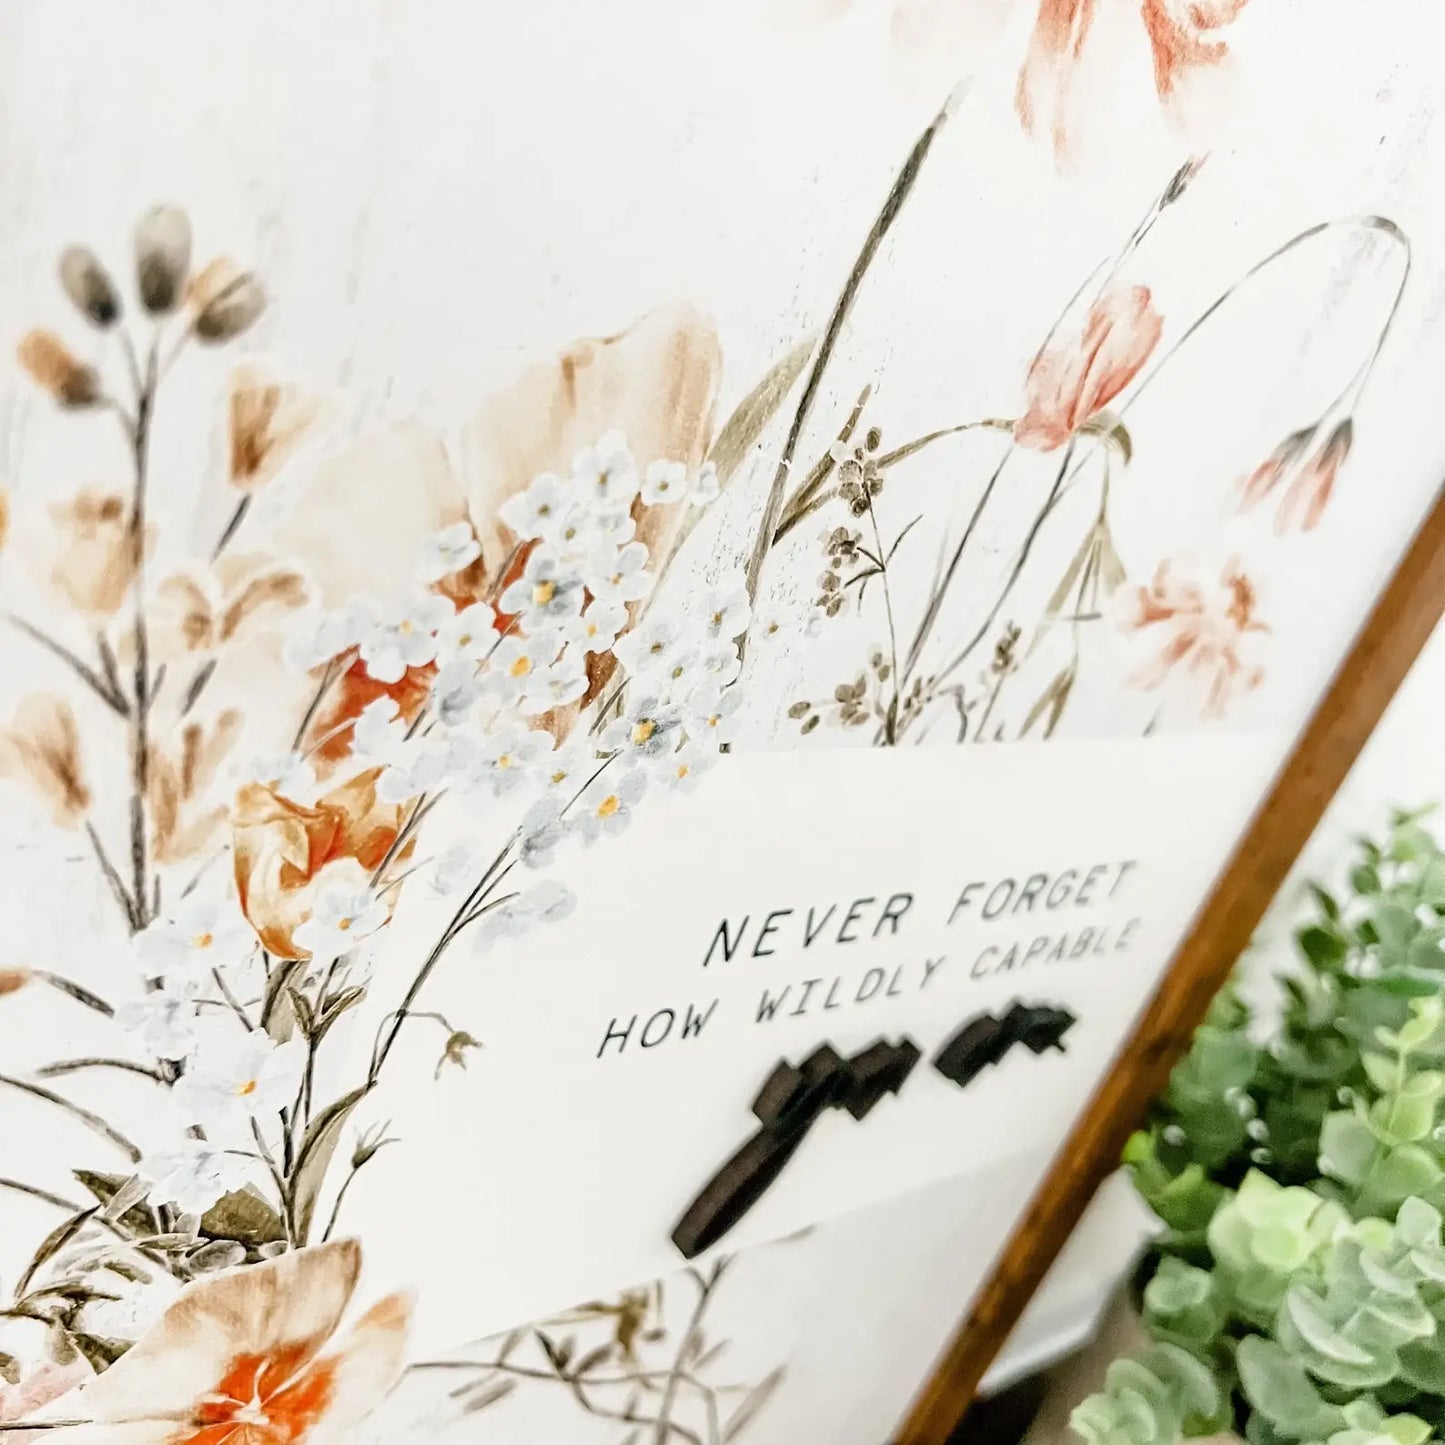 Wildly Capable Floral Signs